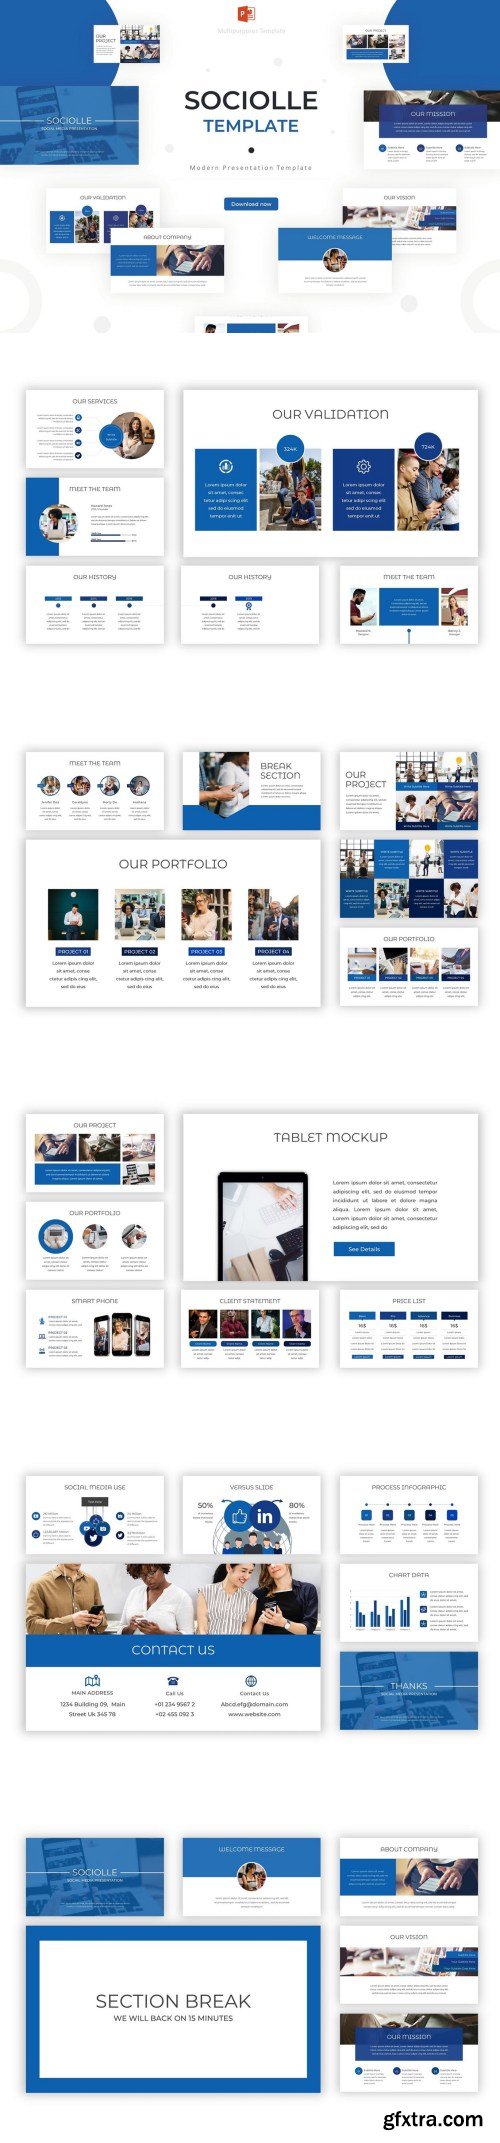 Sociolle - Powerpoint Template